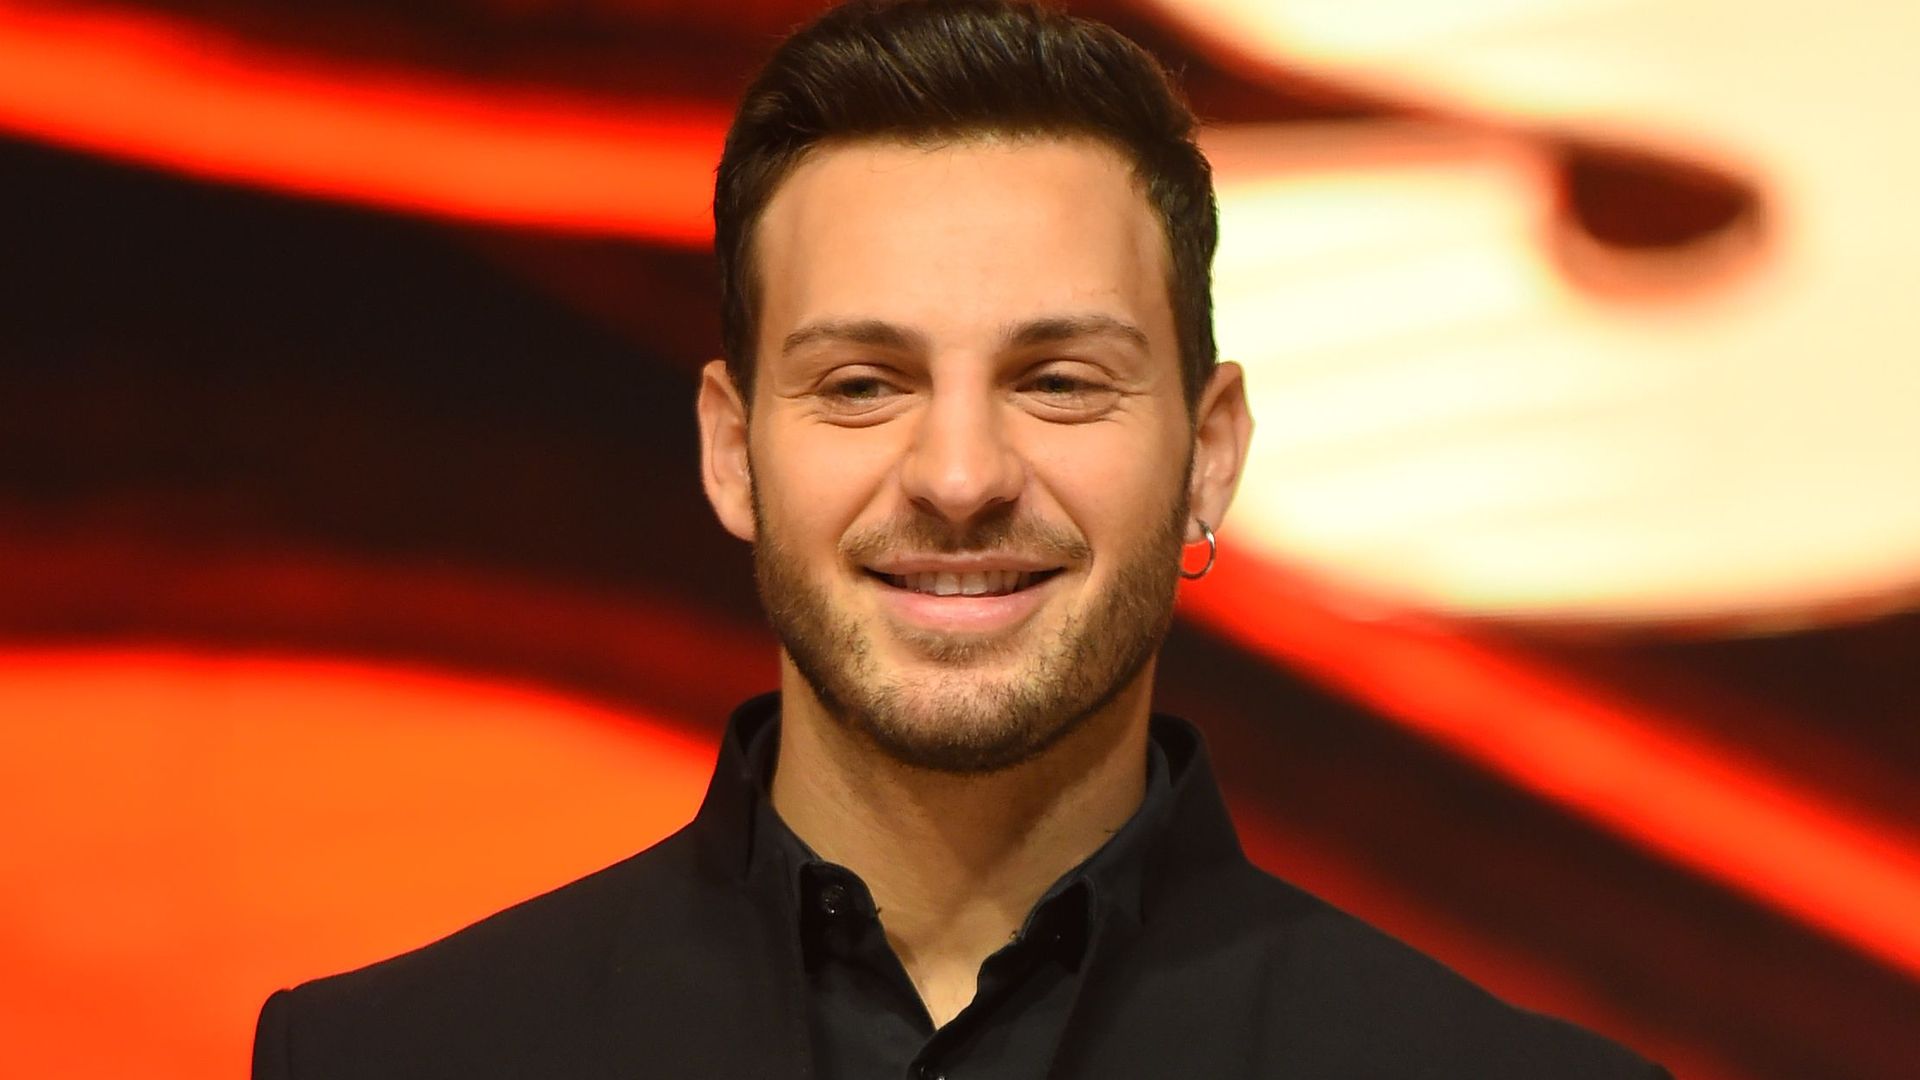 Vito Coppola smiling in a black suit against a red background